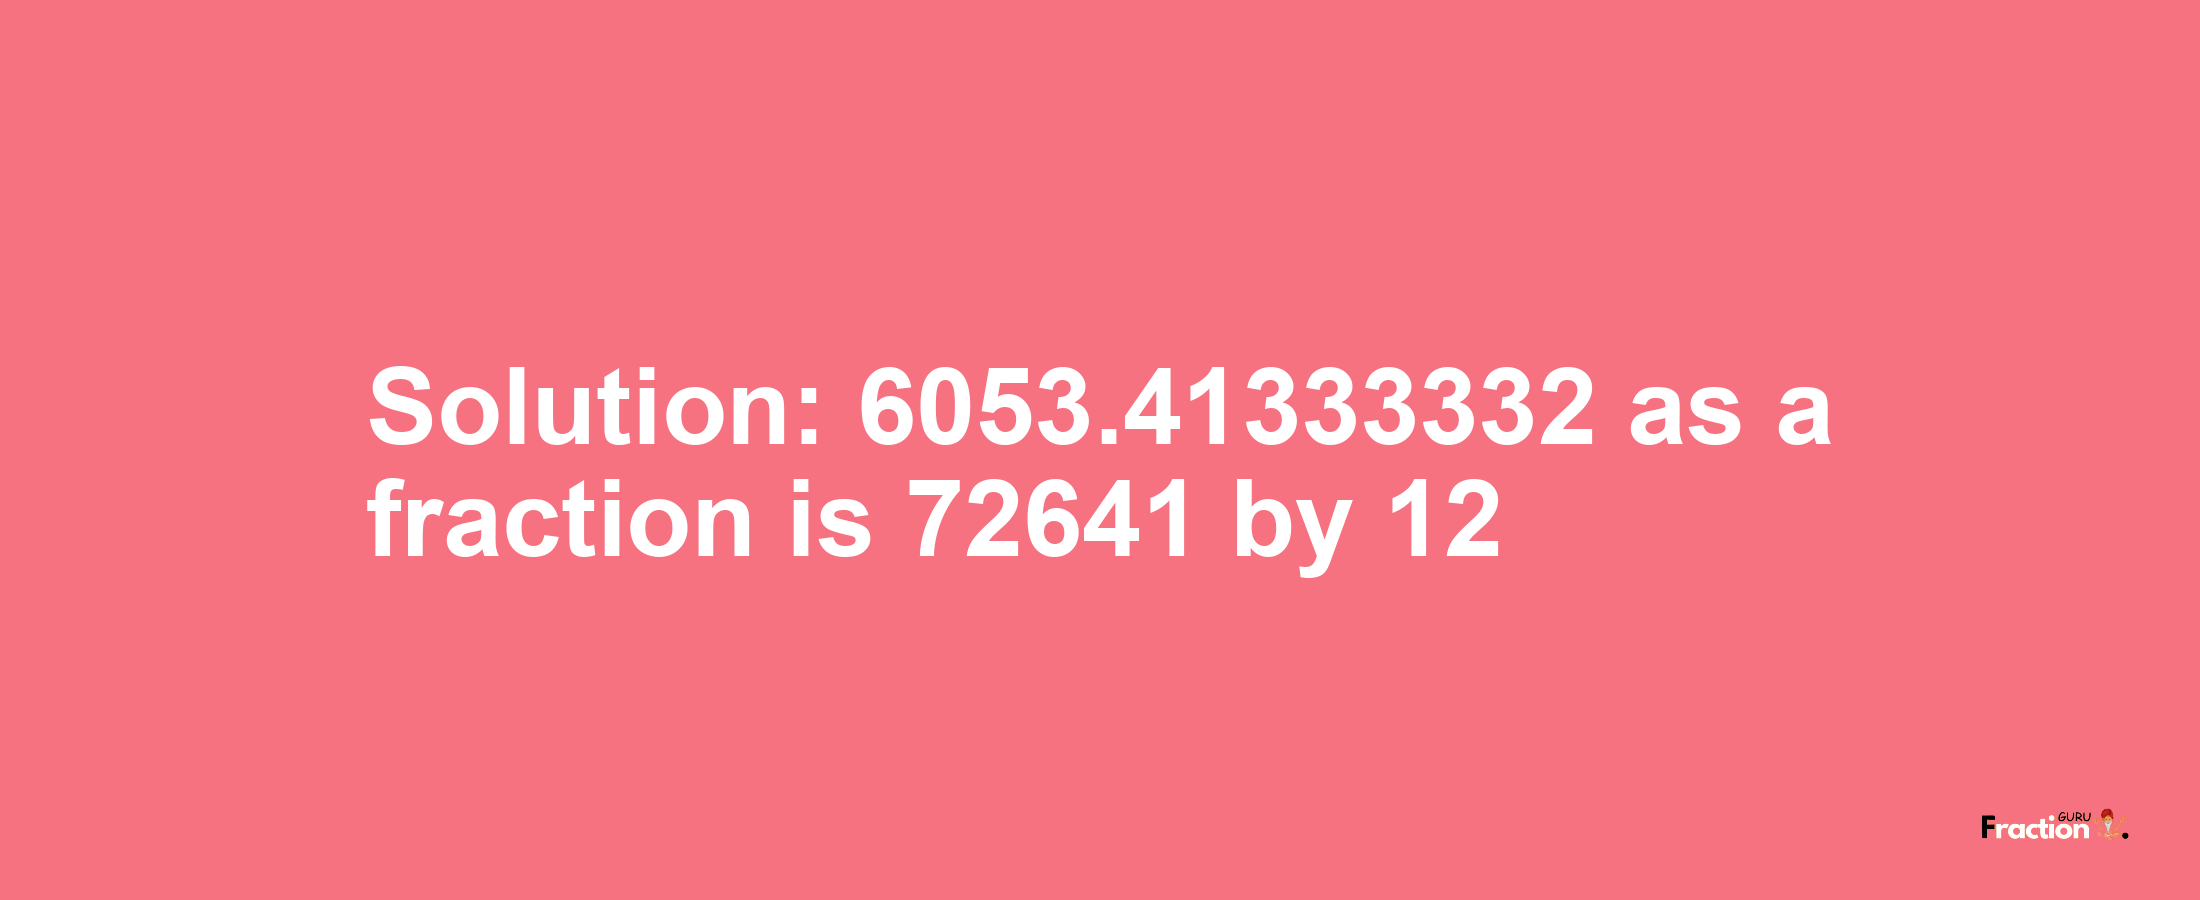 Solution:6053.41333332 as a fraction is 72641/12